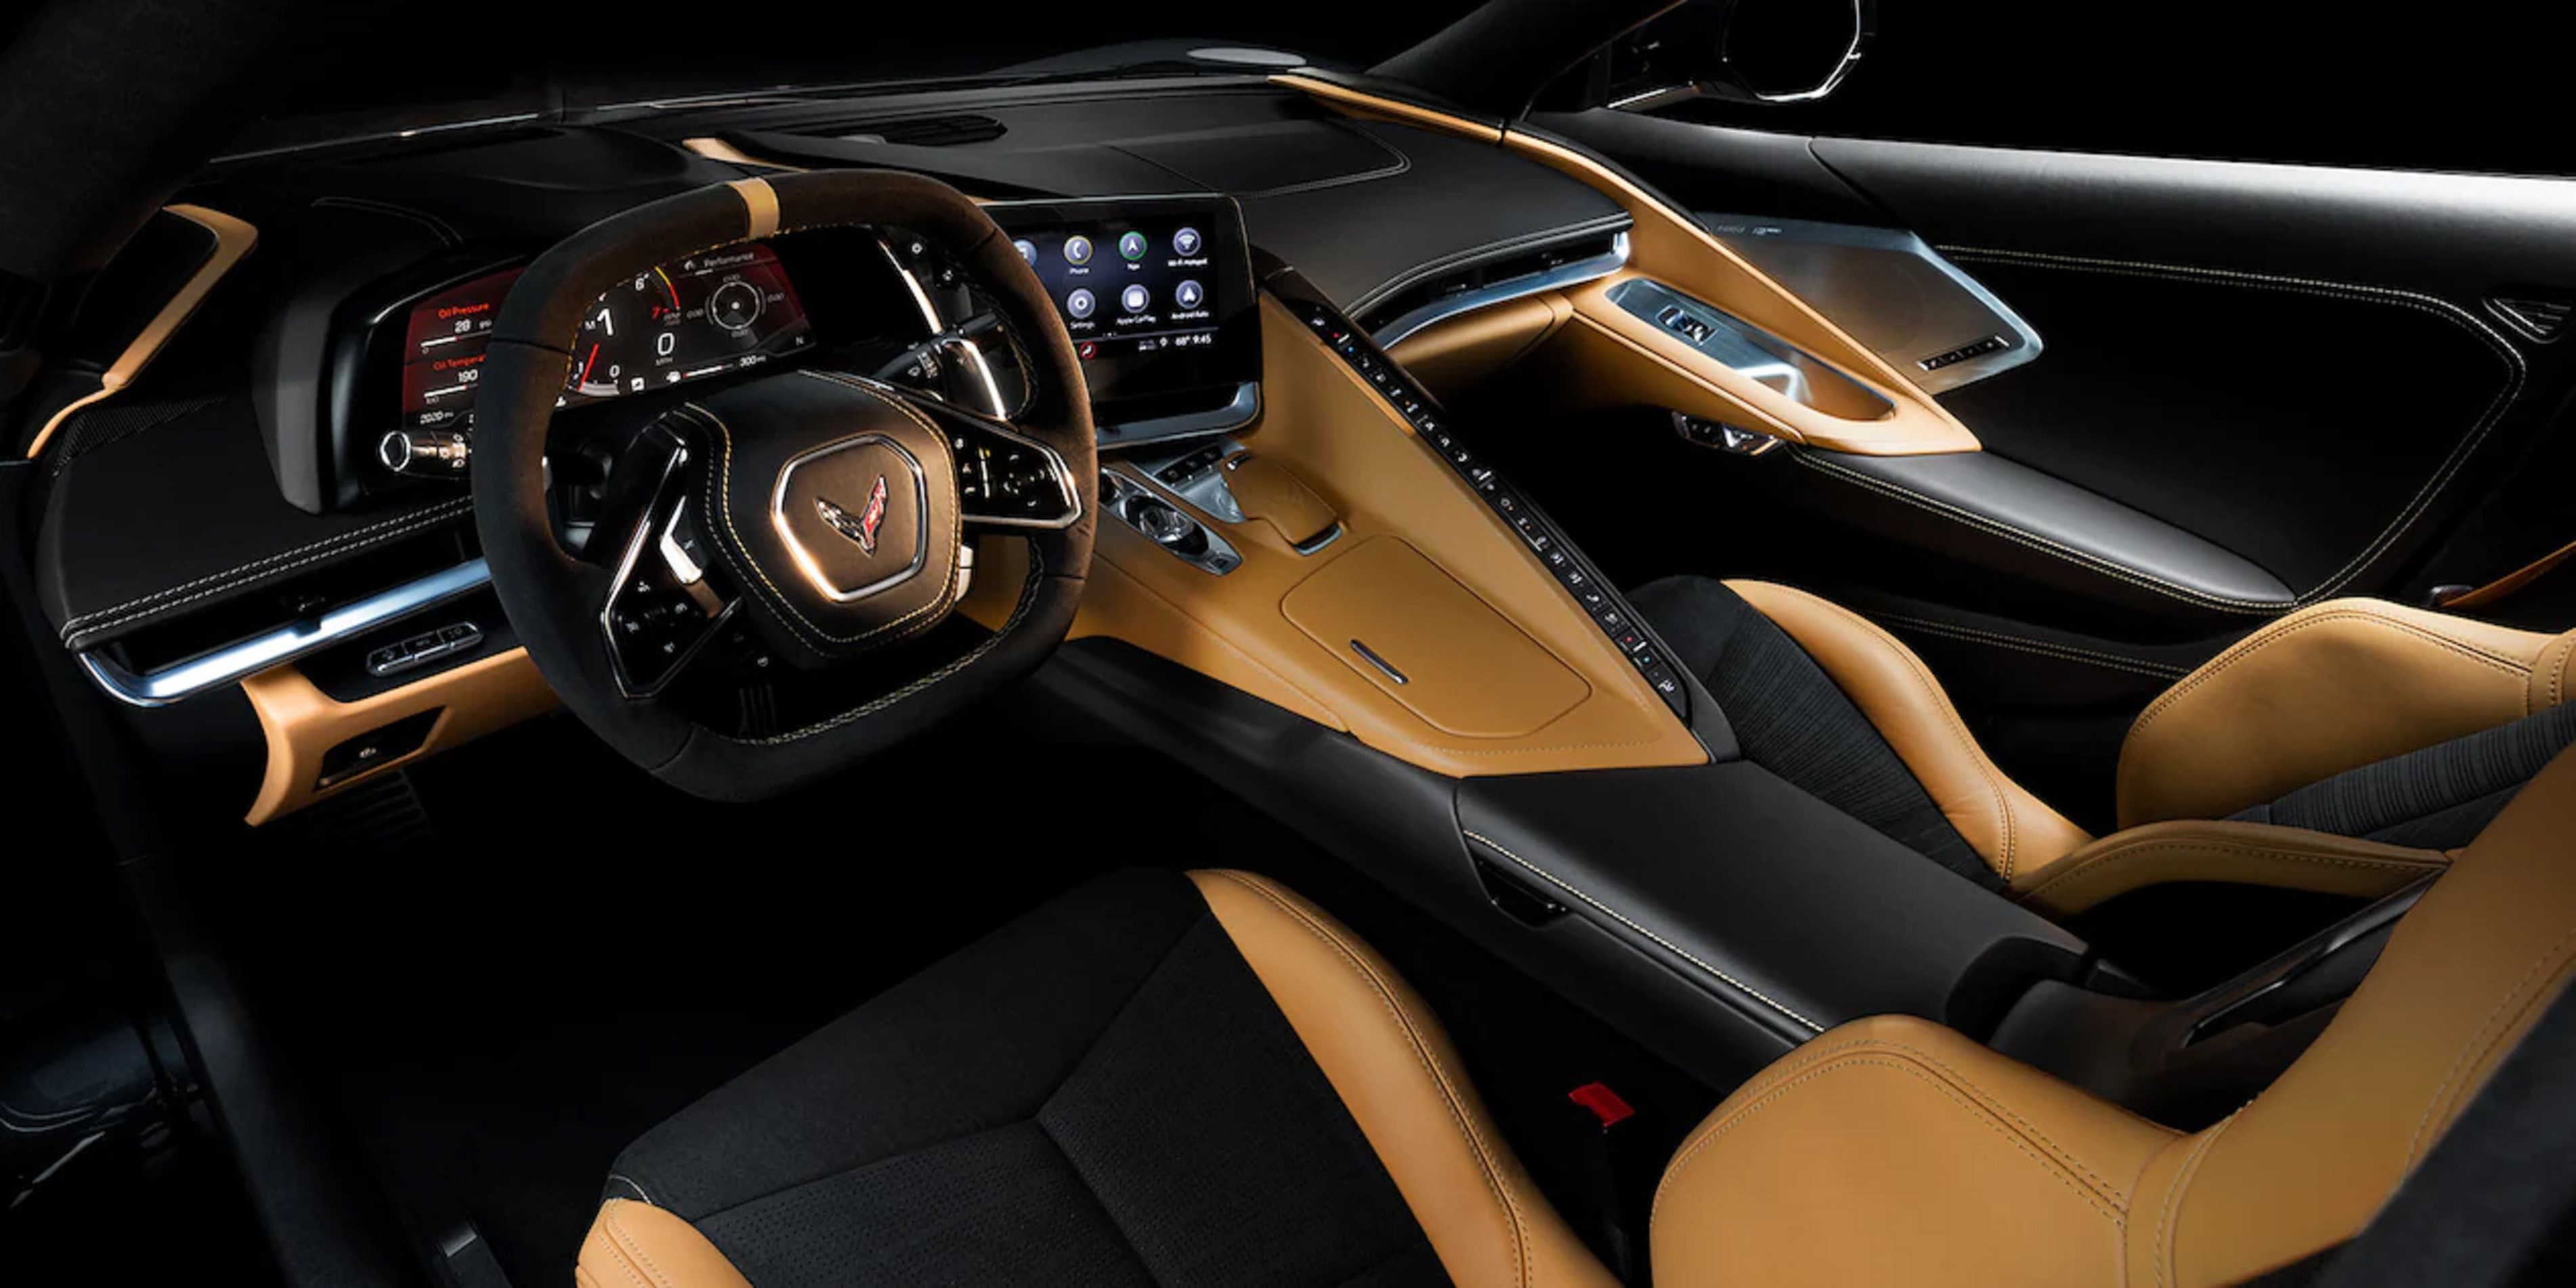 The tan-and-black optional GT2 seats and dashboard of a 2022 Chevrolet C8 Corvette 3LT Coupe